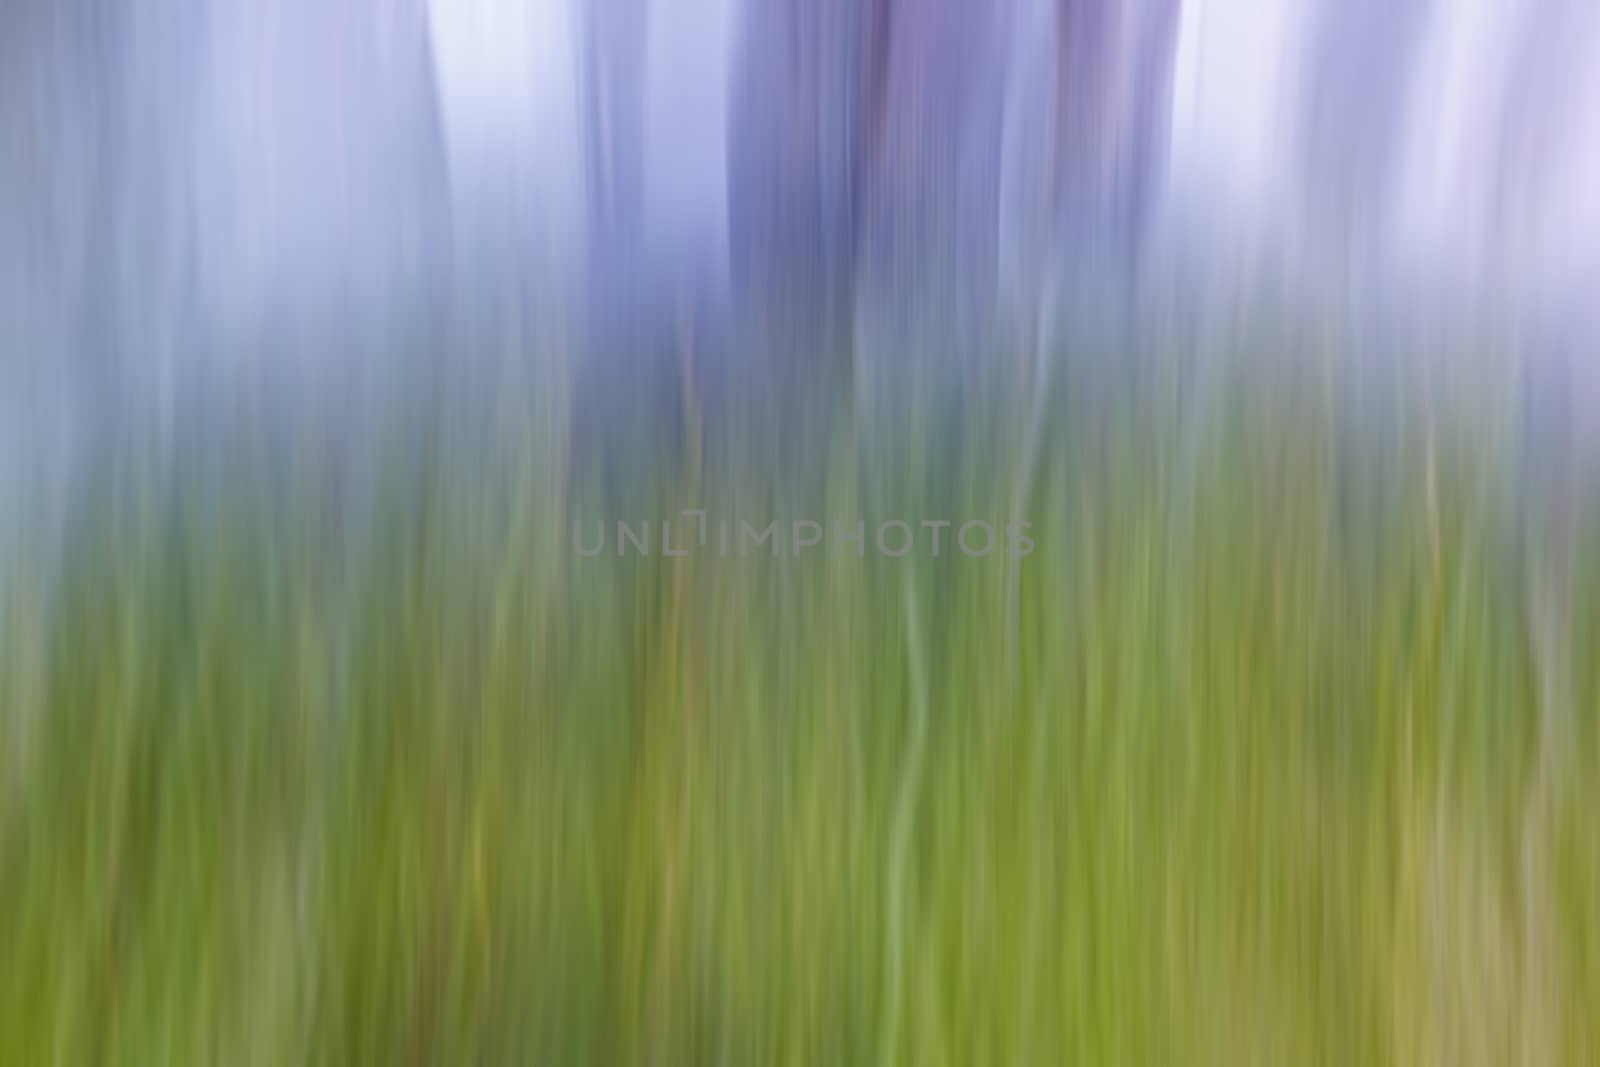 Blurry grass gradient background illustration with green yellow and purple color for designers and illustrators